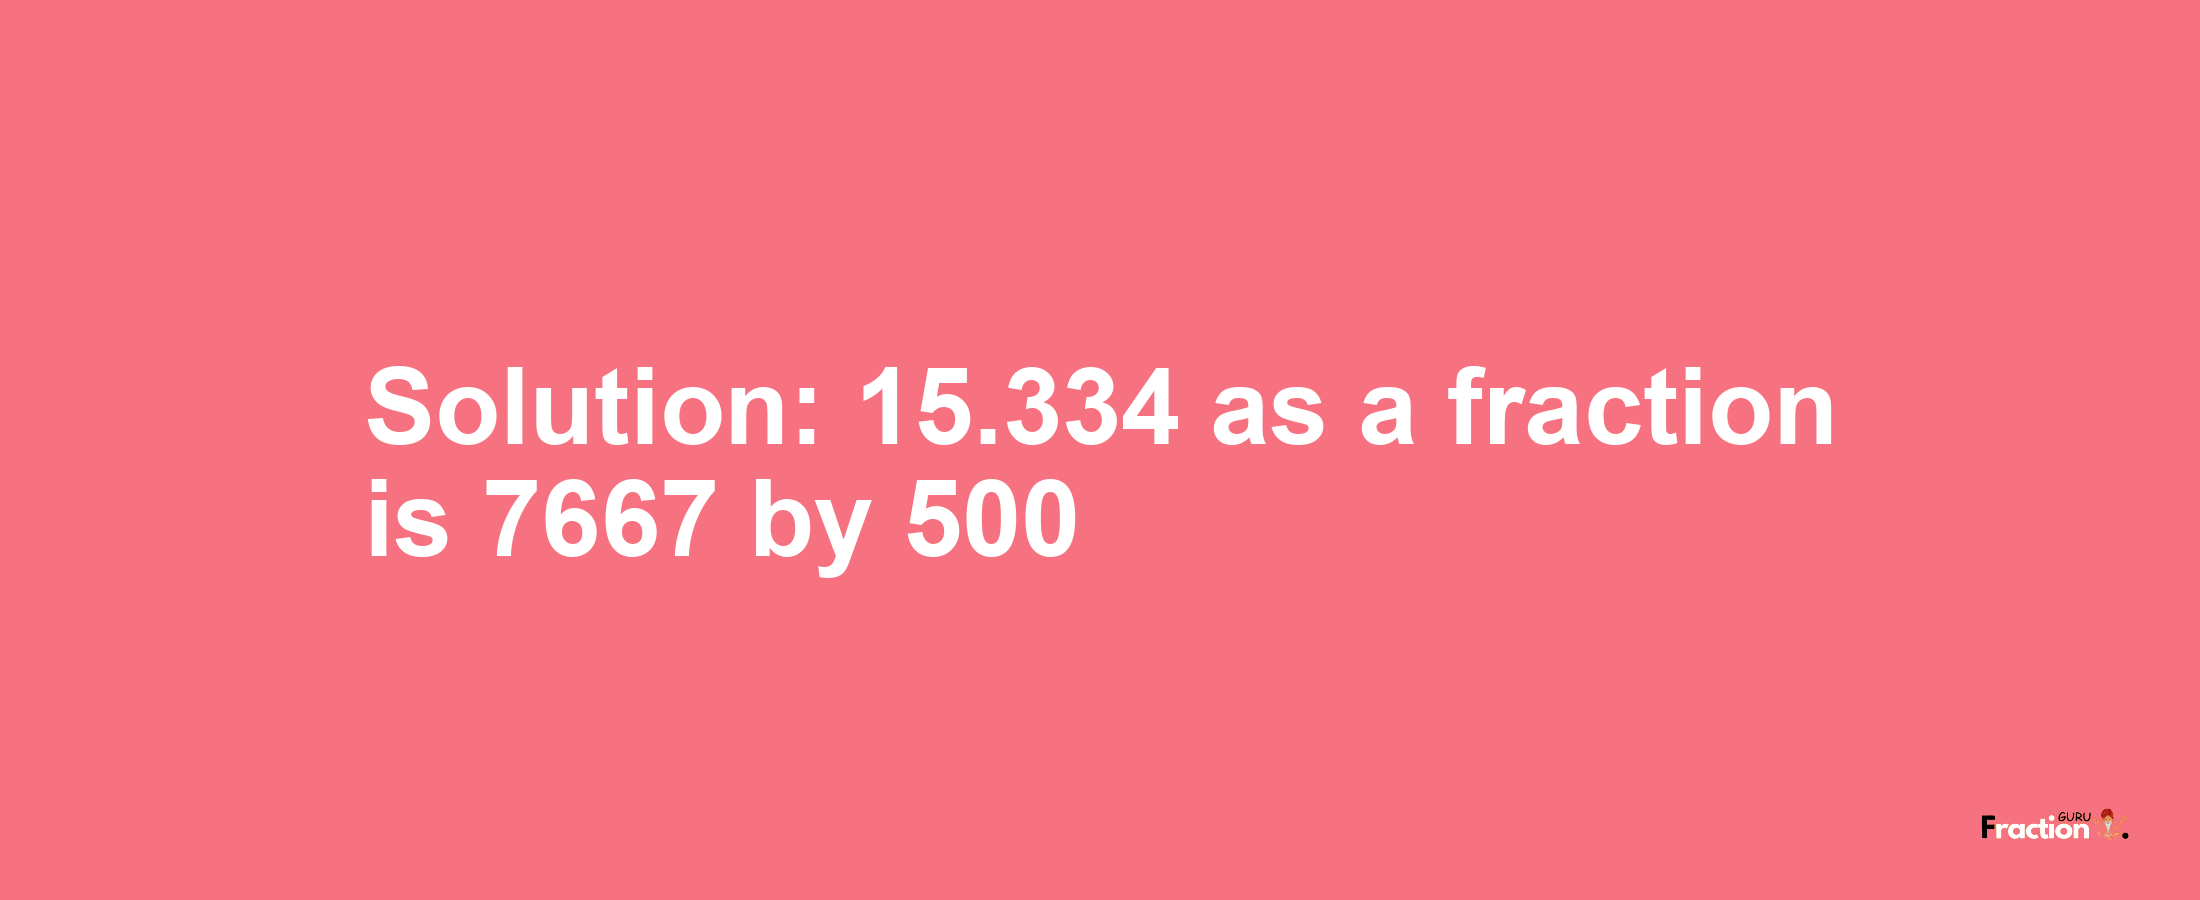 Solution:15.334 as a fraction is 7667/500